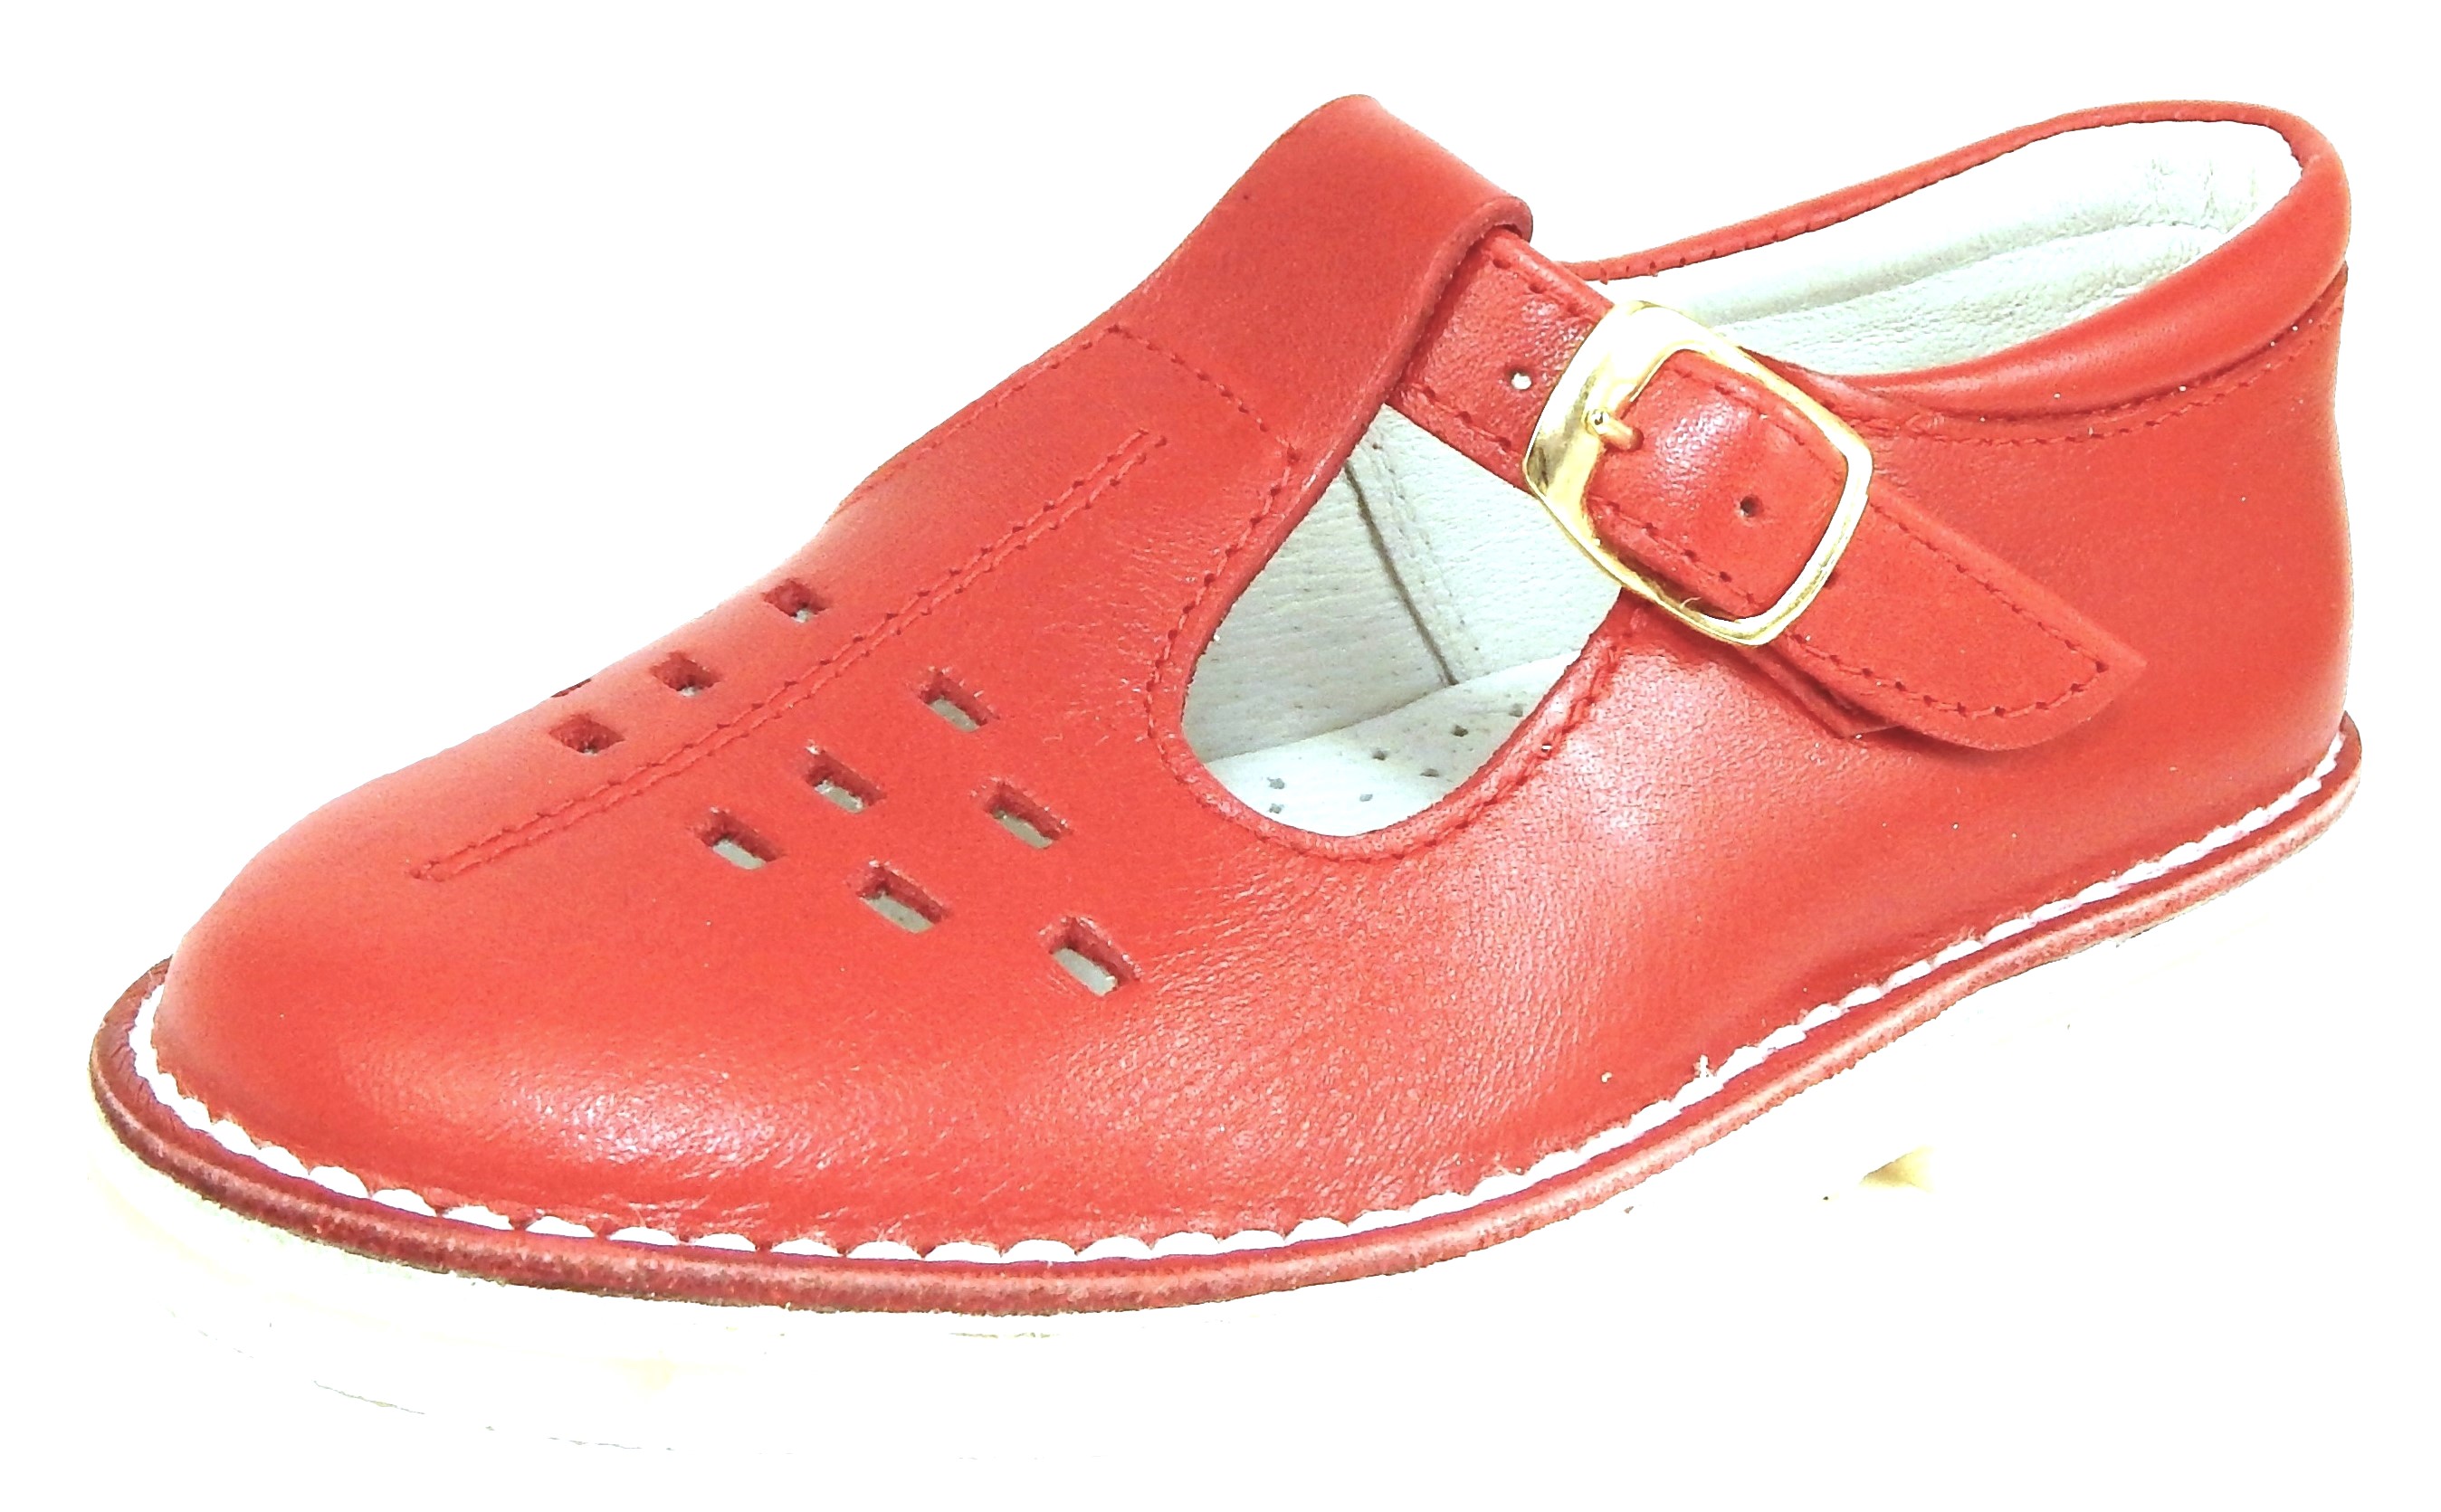 A-1154 P - Red Leather T-Straps